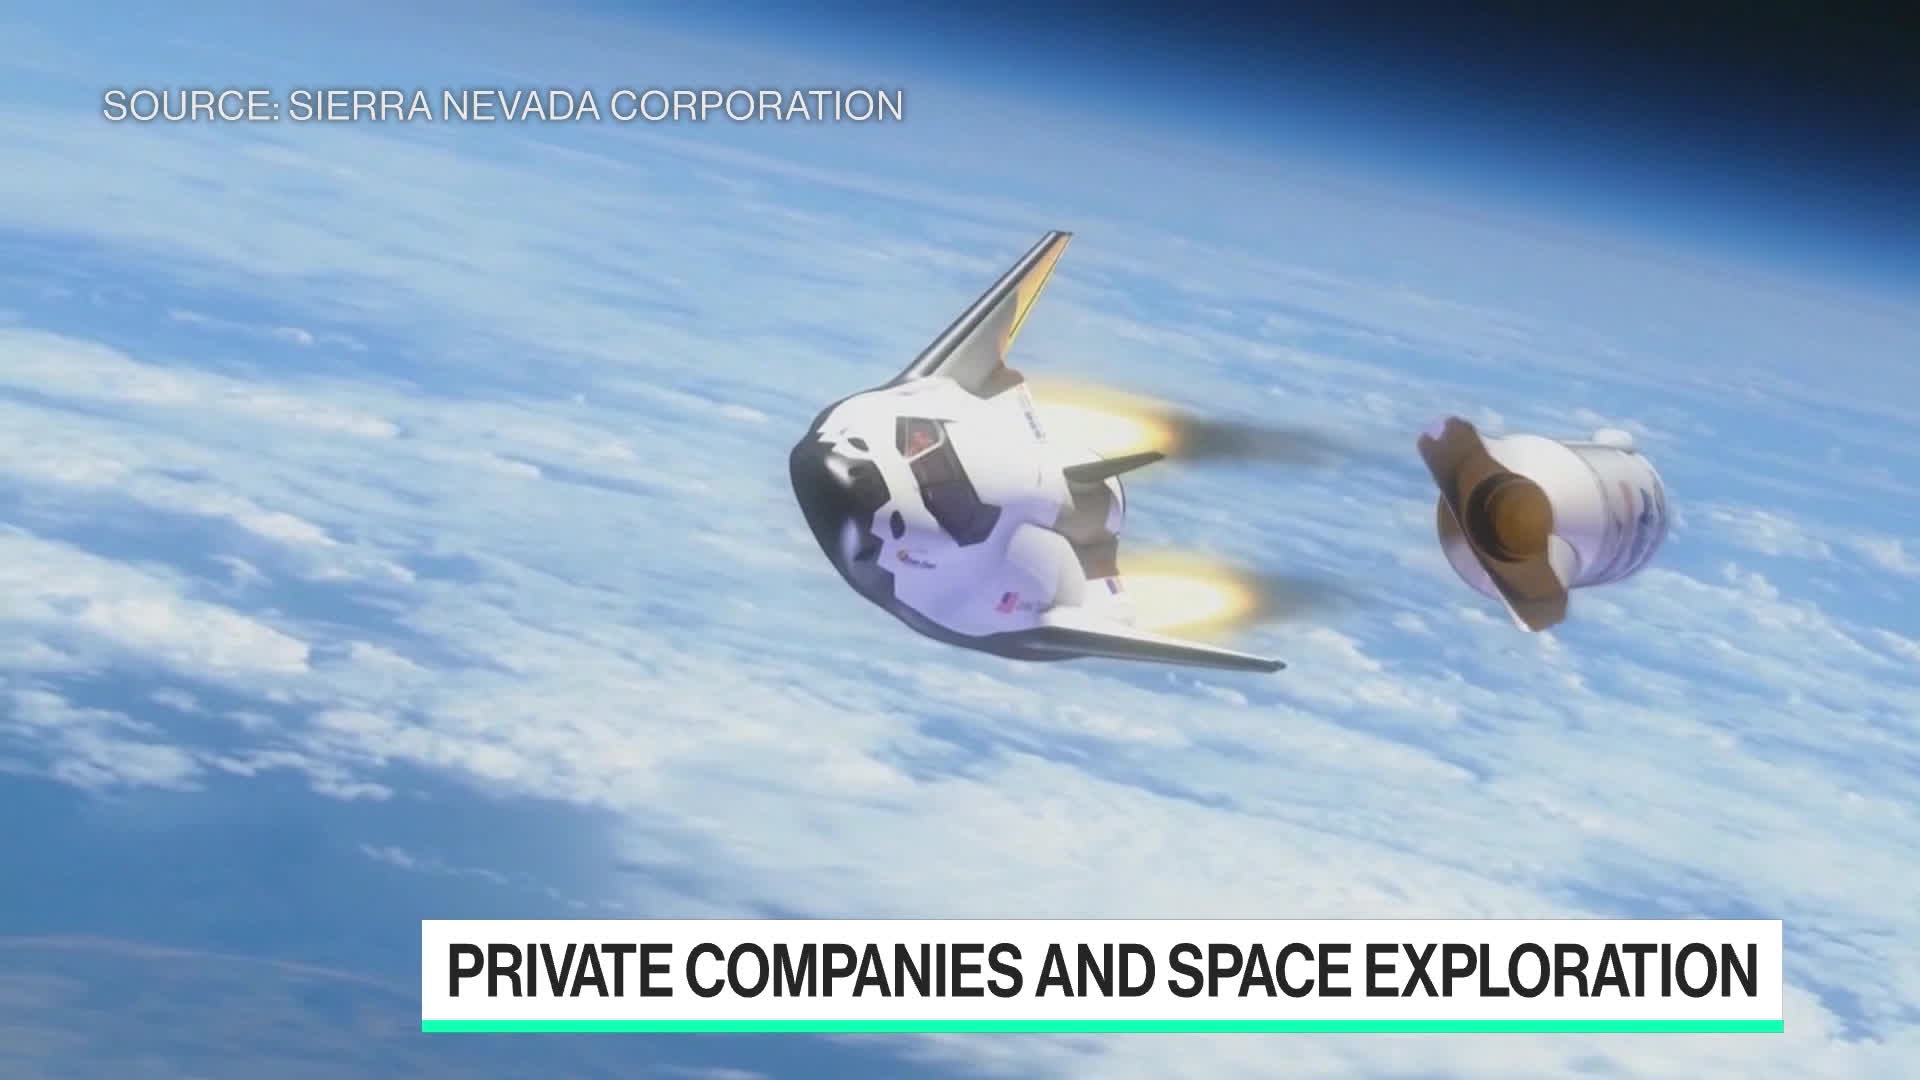 Sierra Space Plans to Launch Mini Space Shuttle Next Year